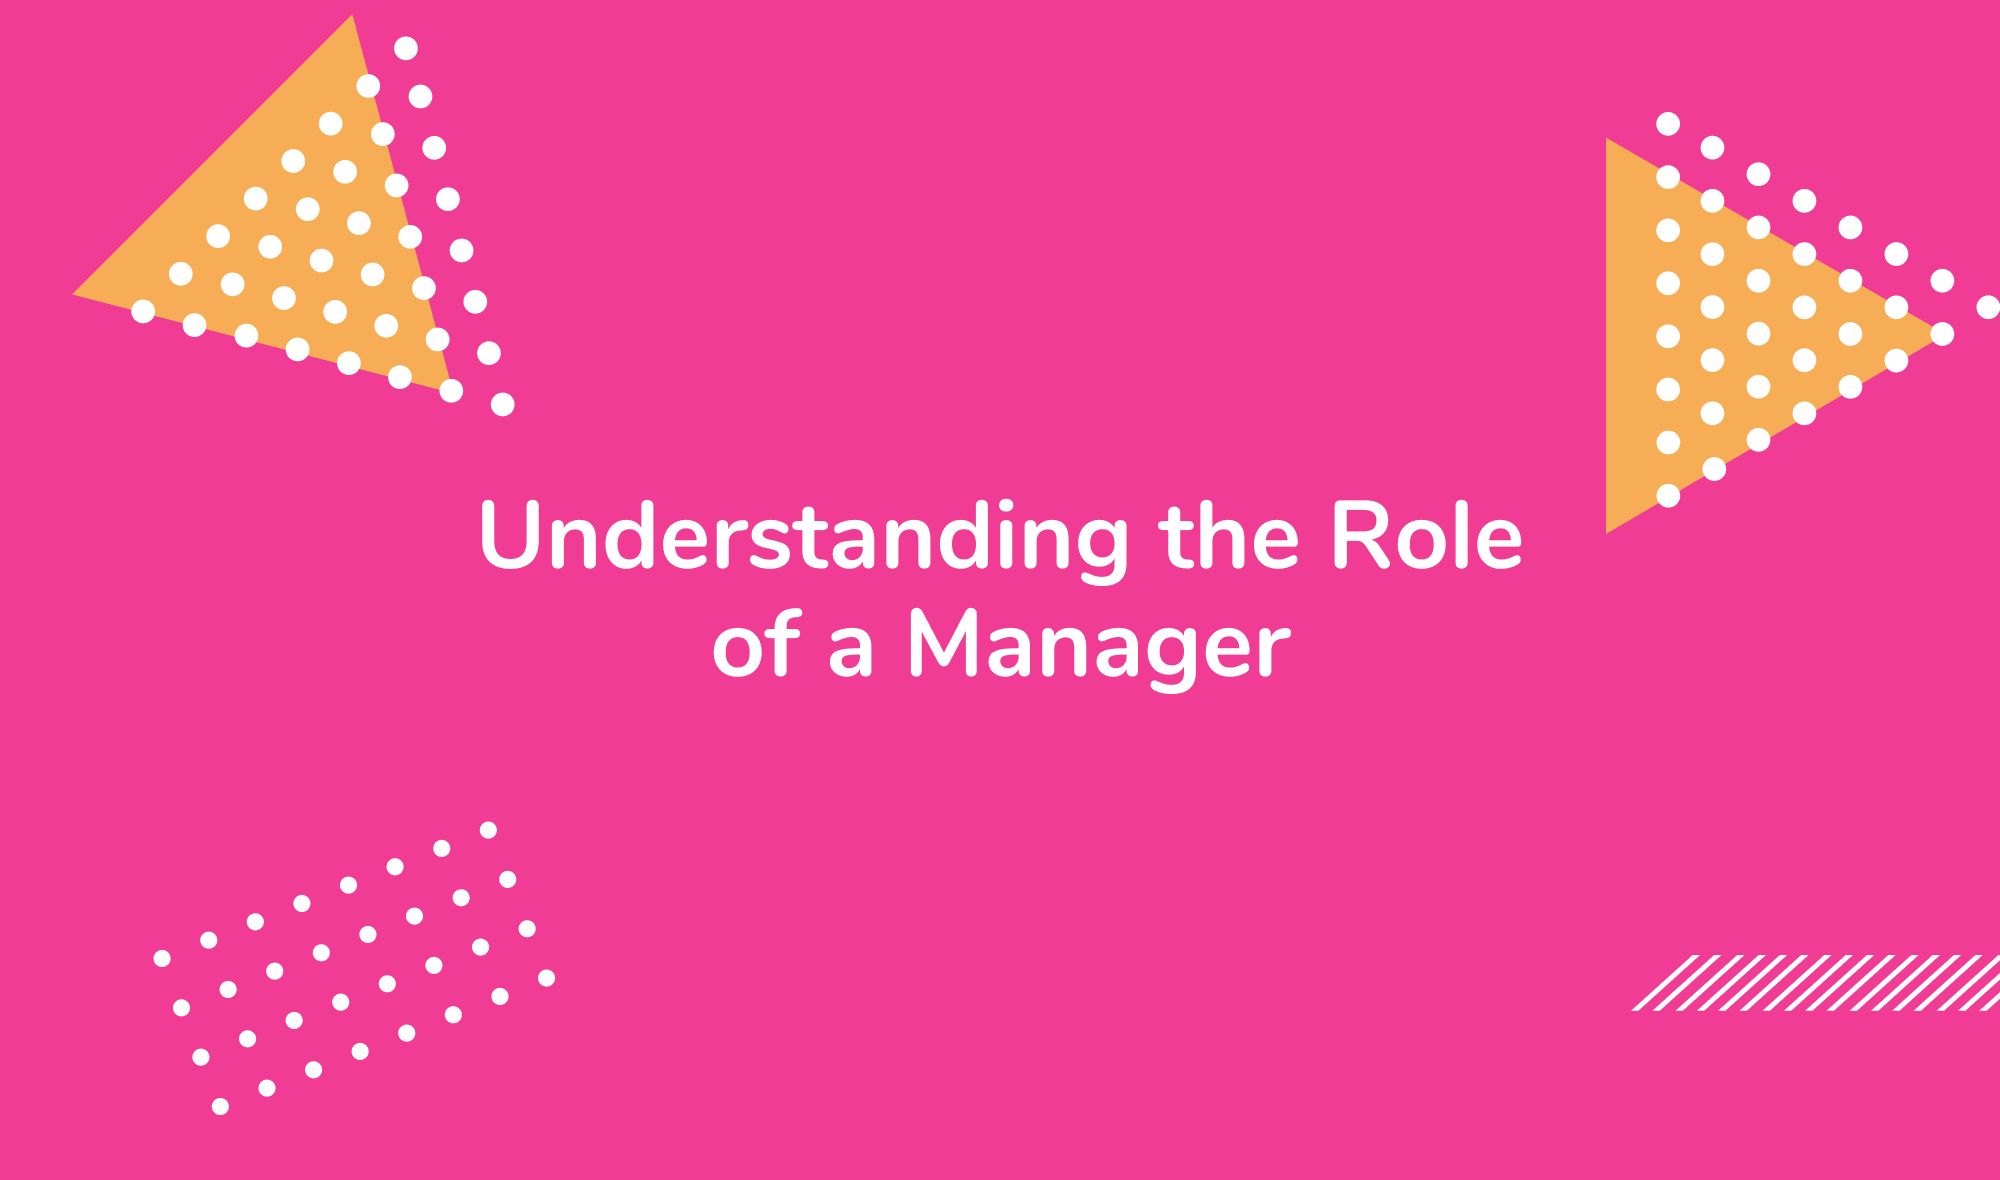 Understanding the Role of a Manager